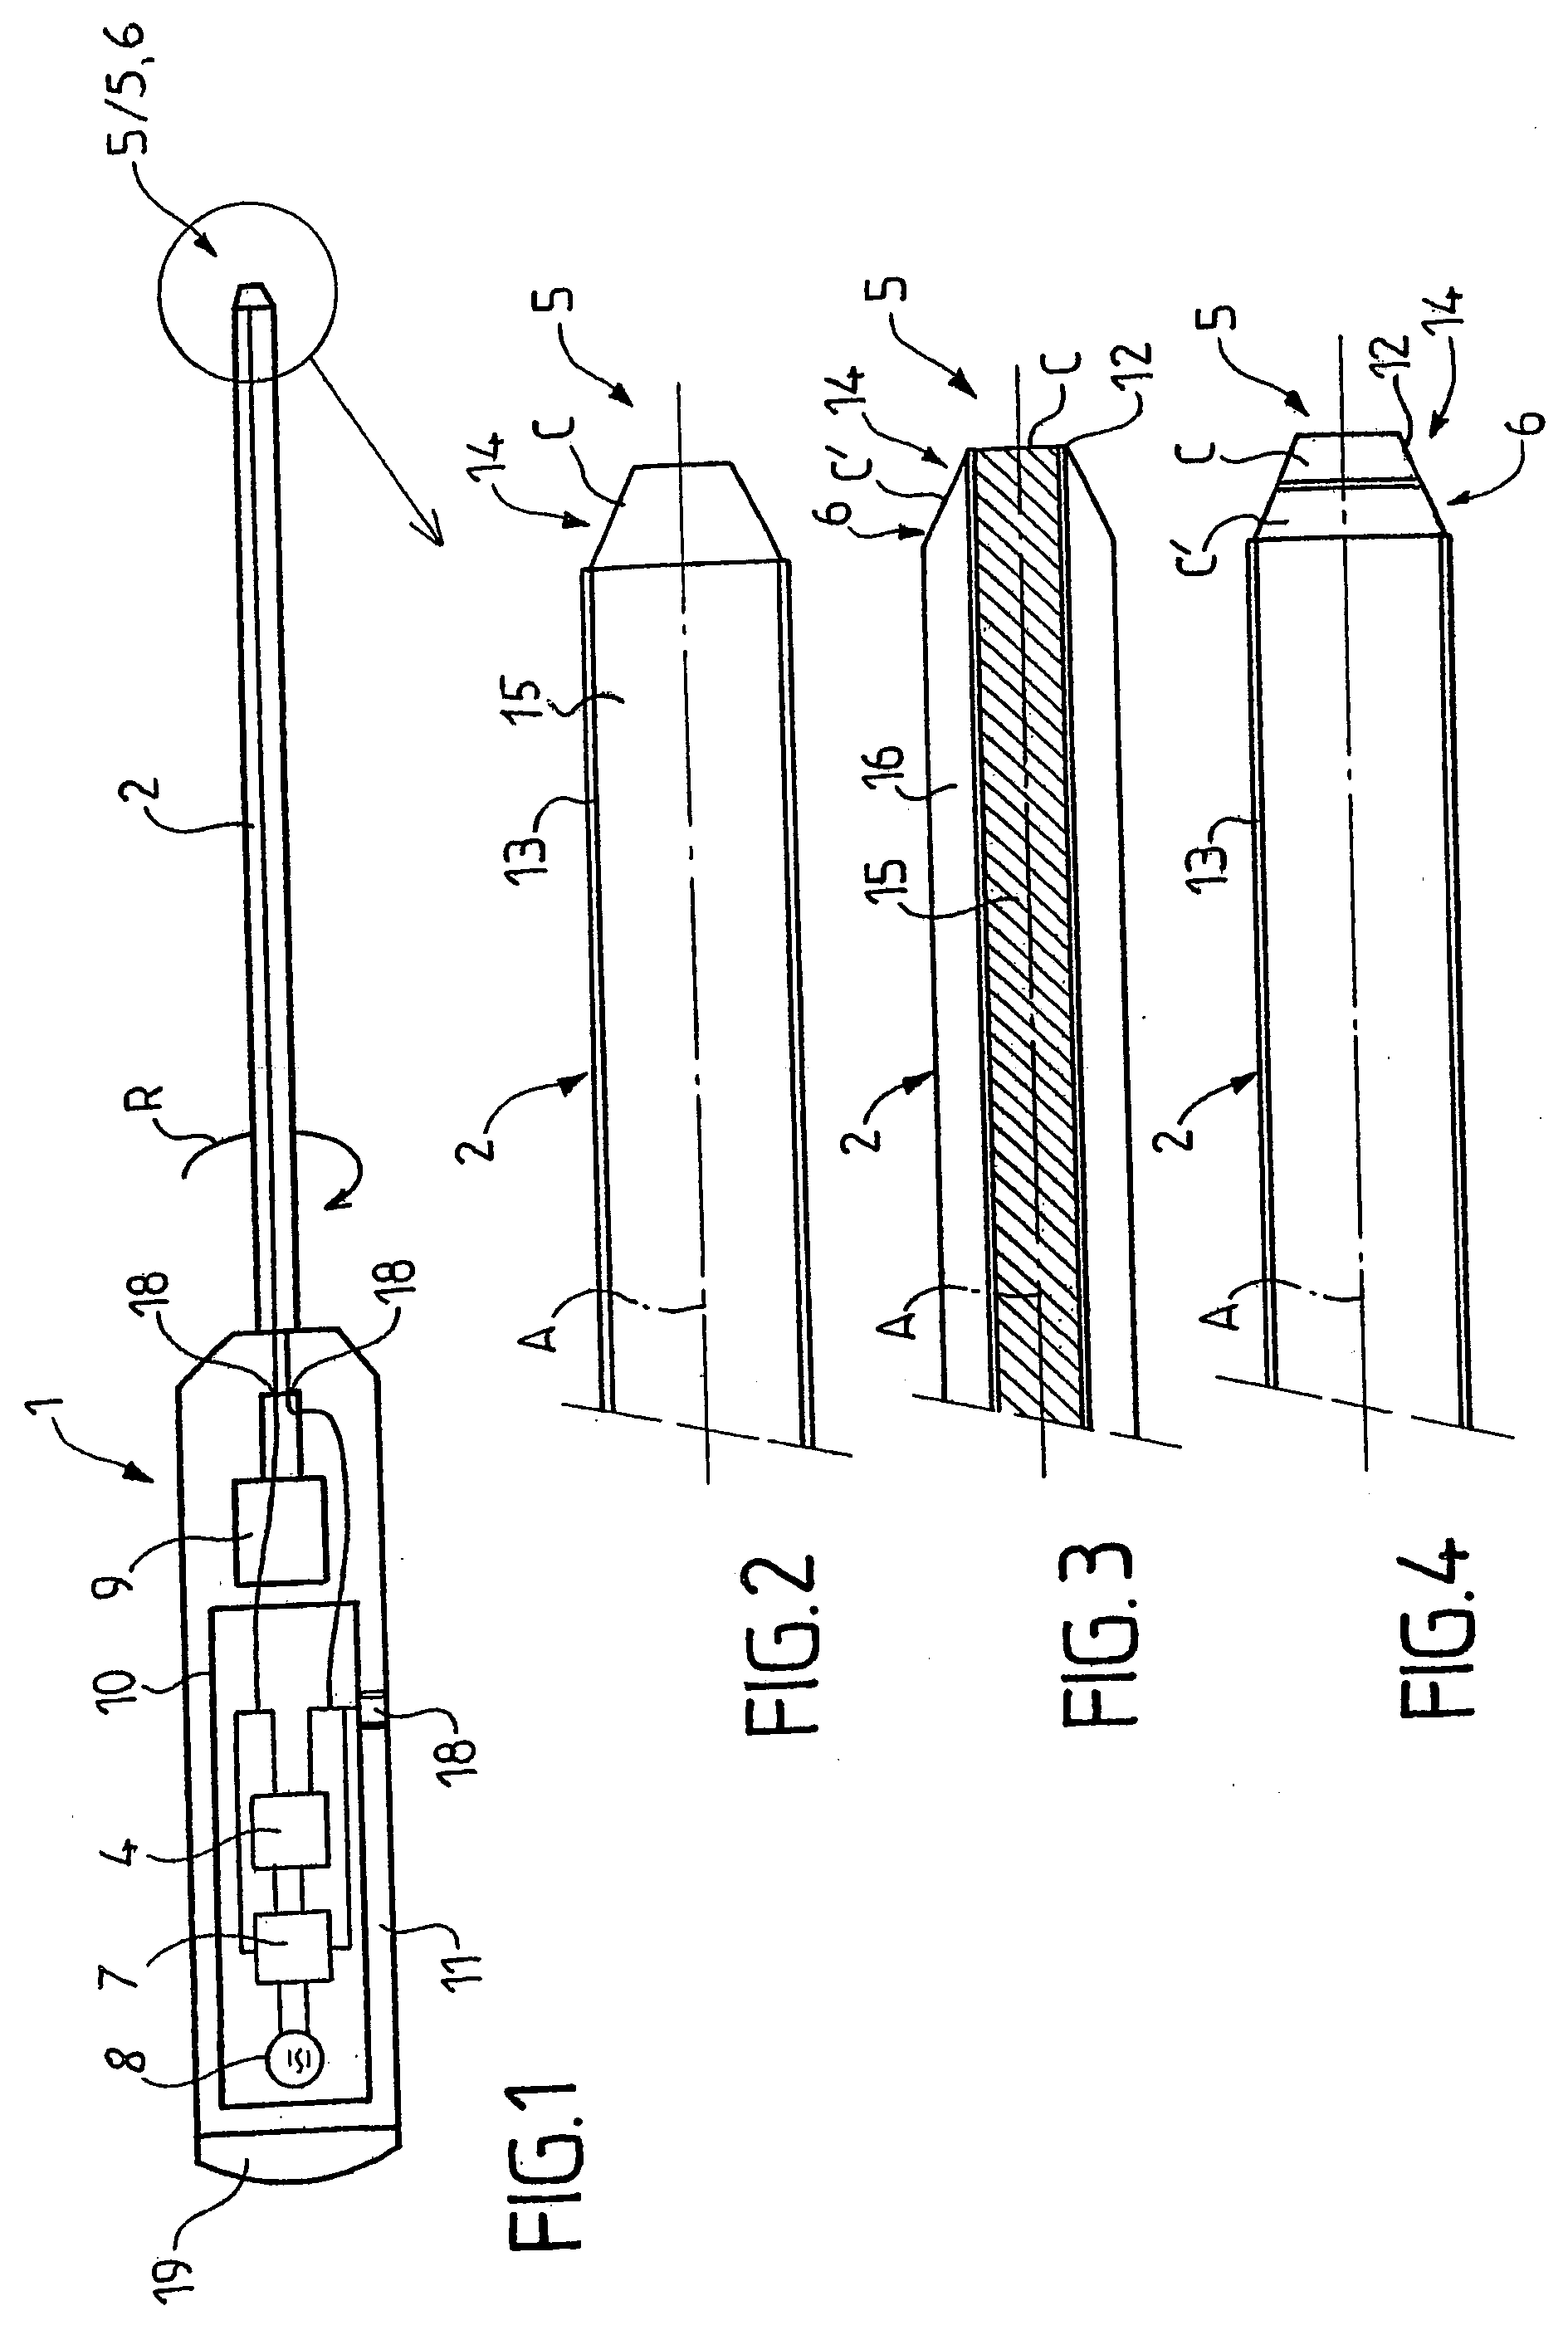 Device for monitoring penetration into anatomical members